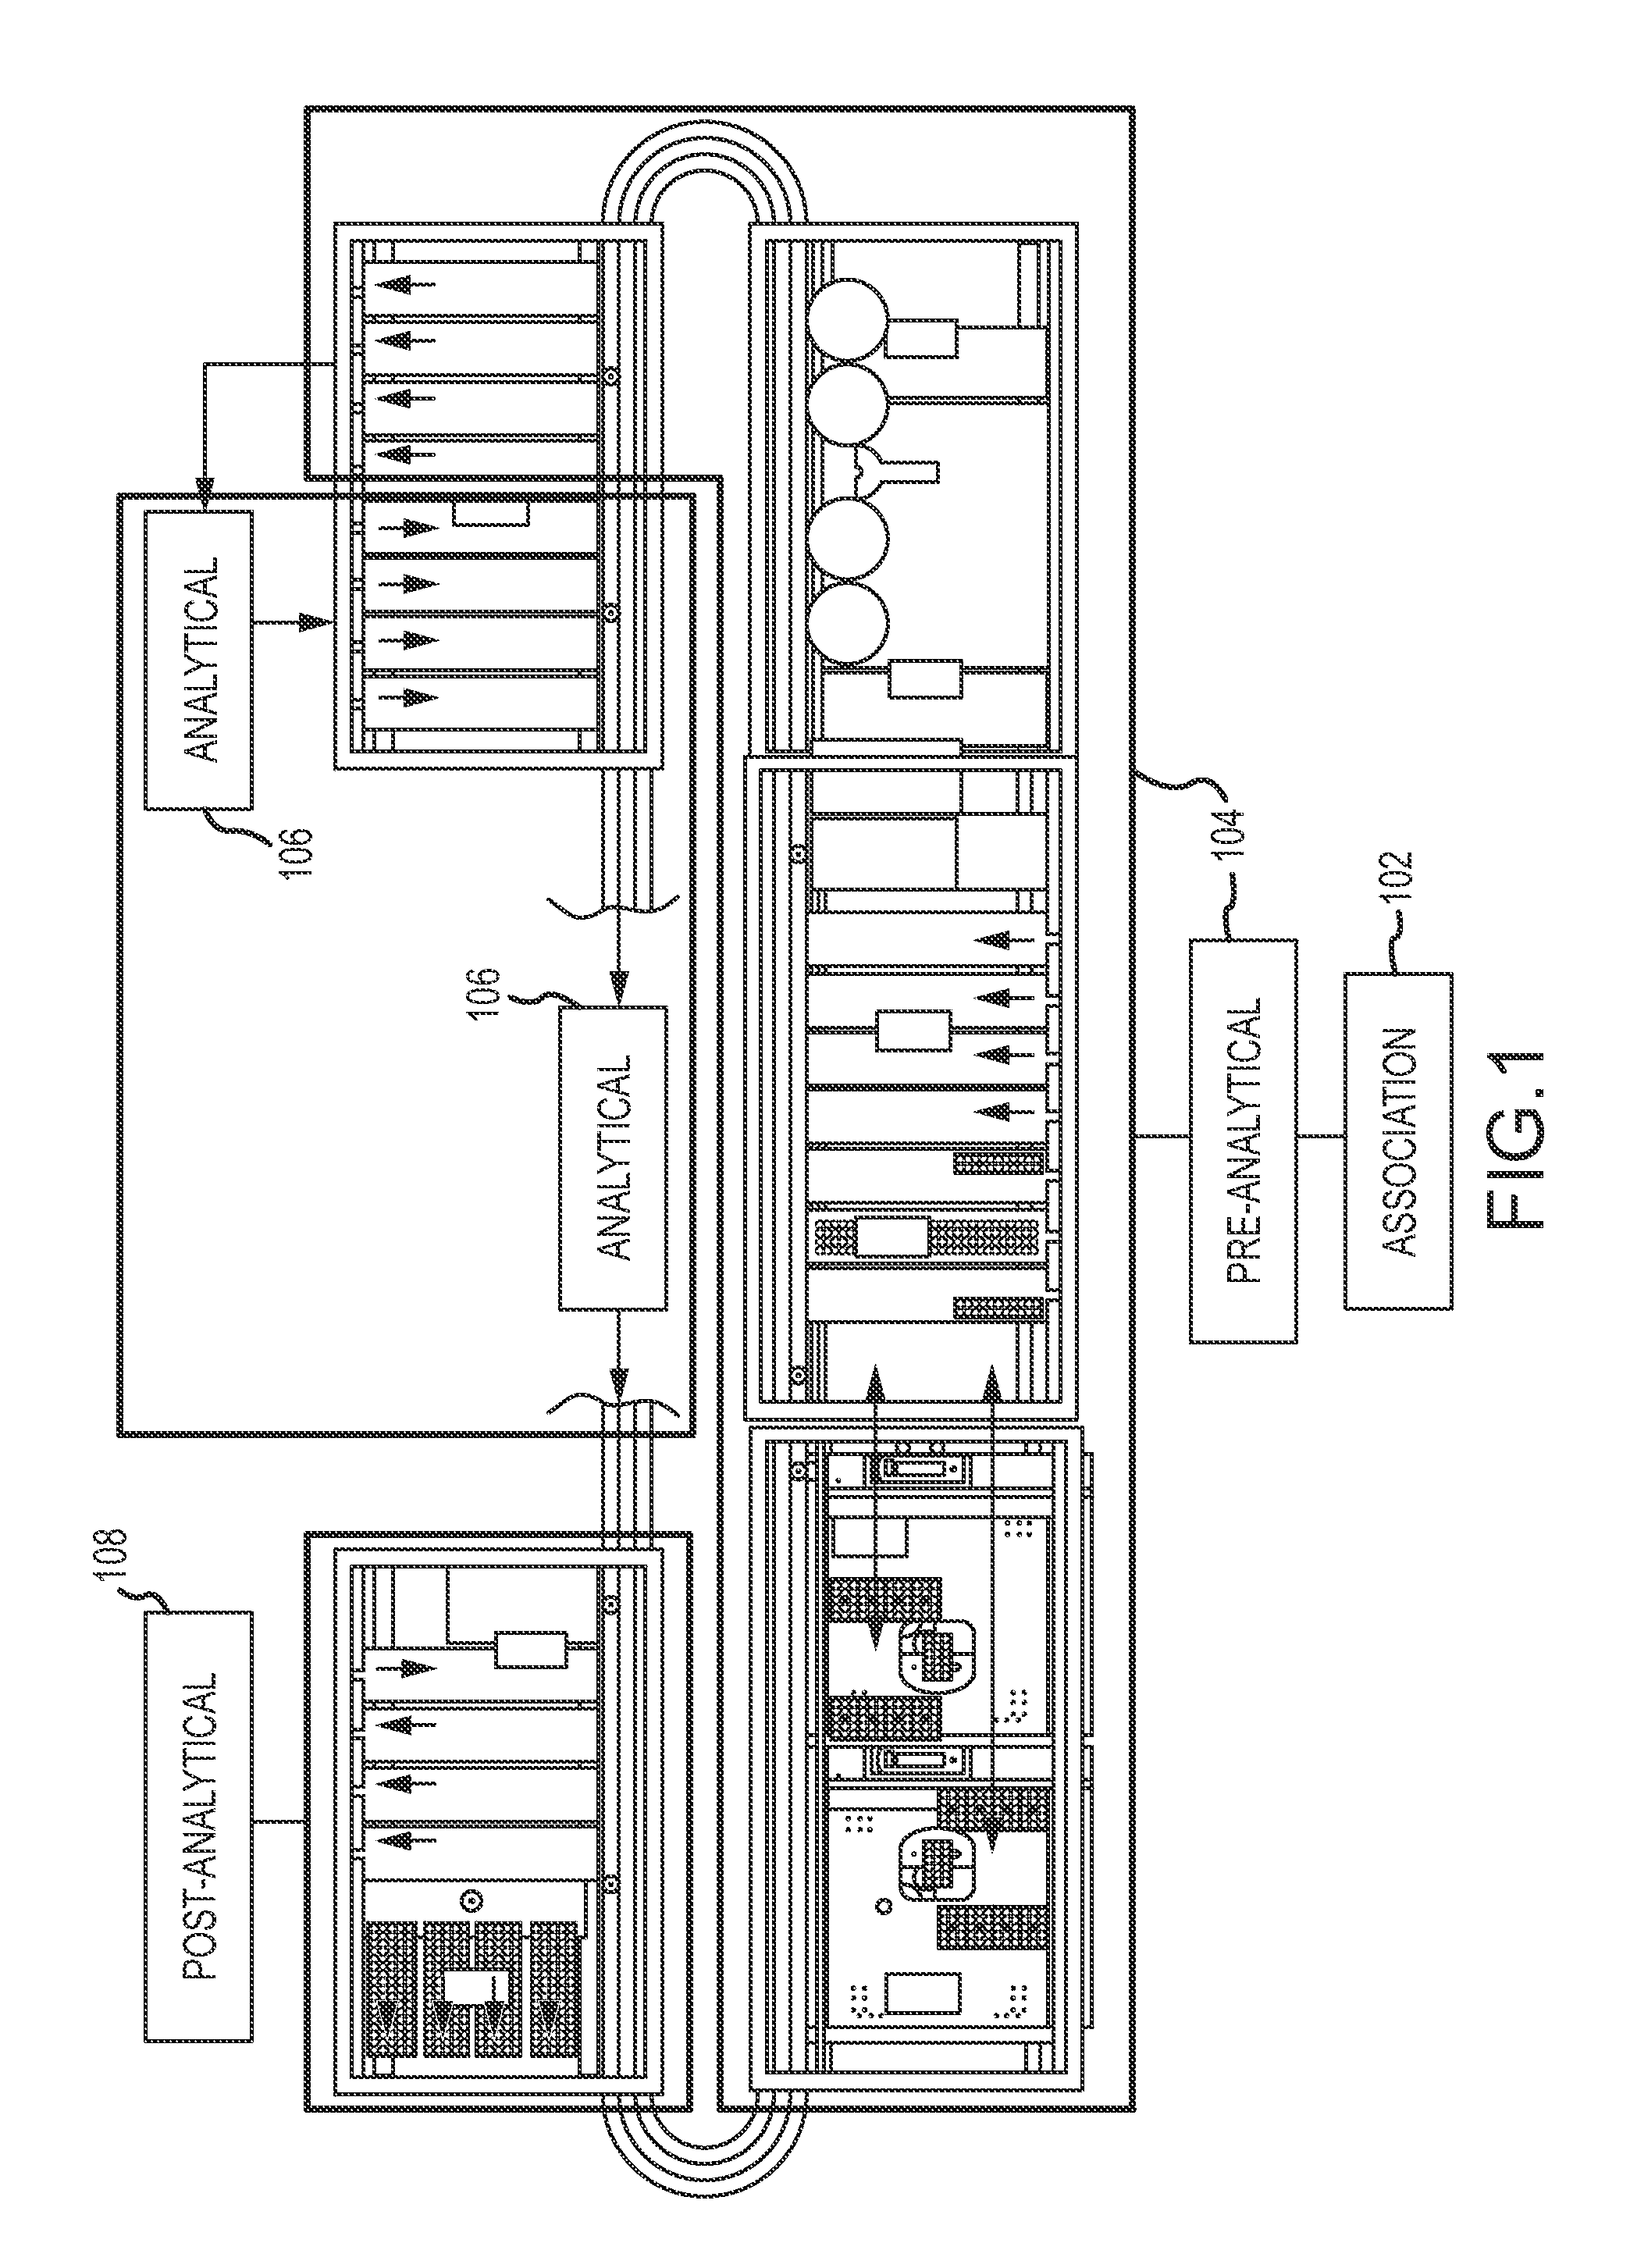 System and method for processing samples